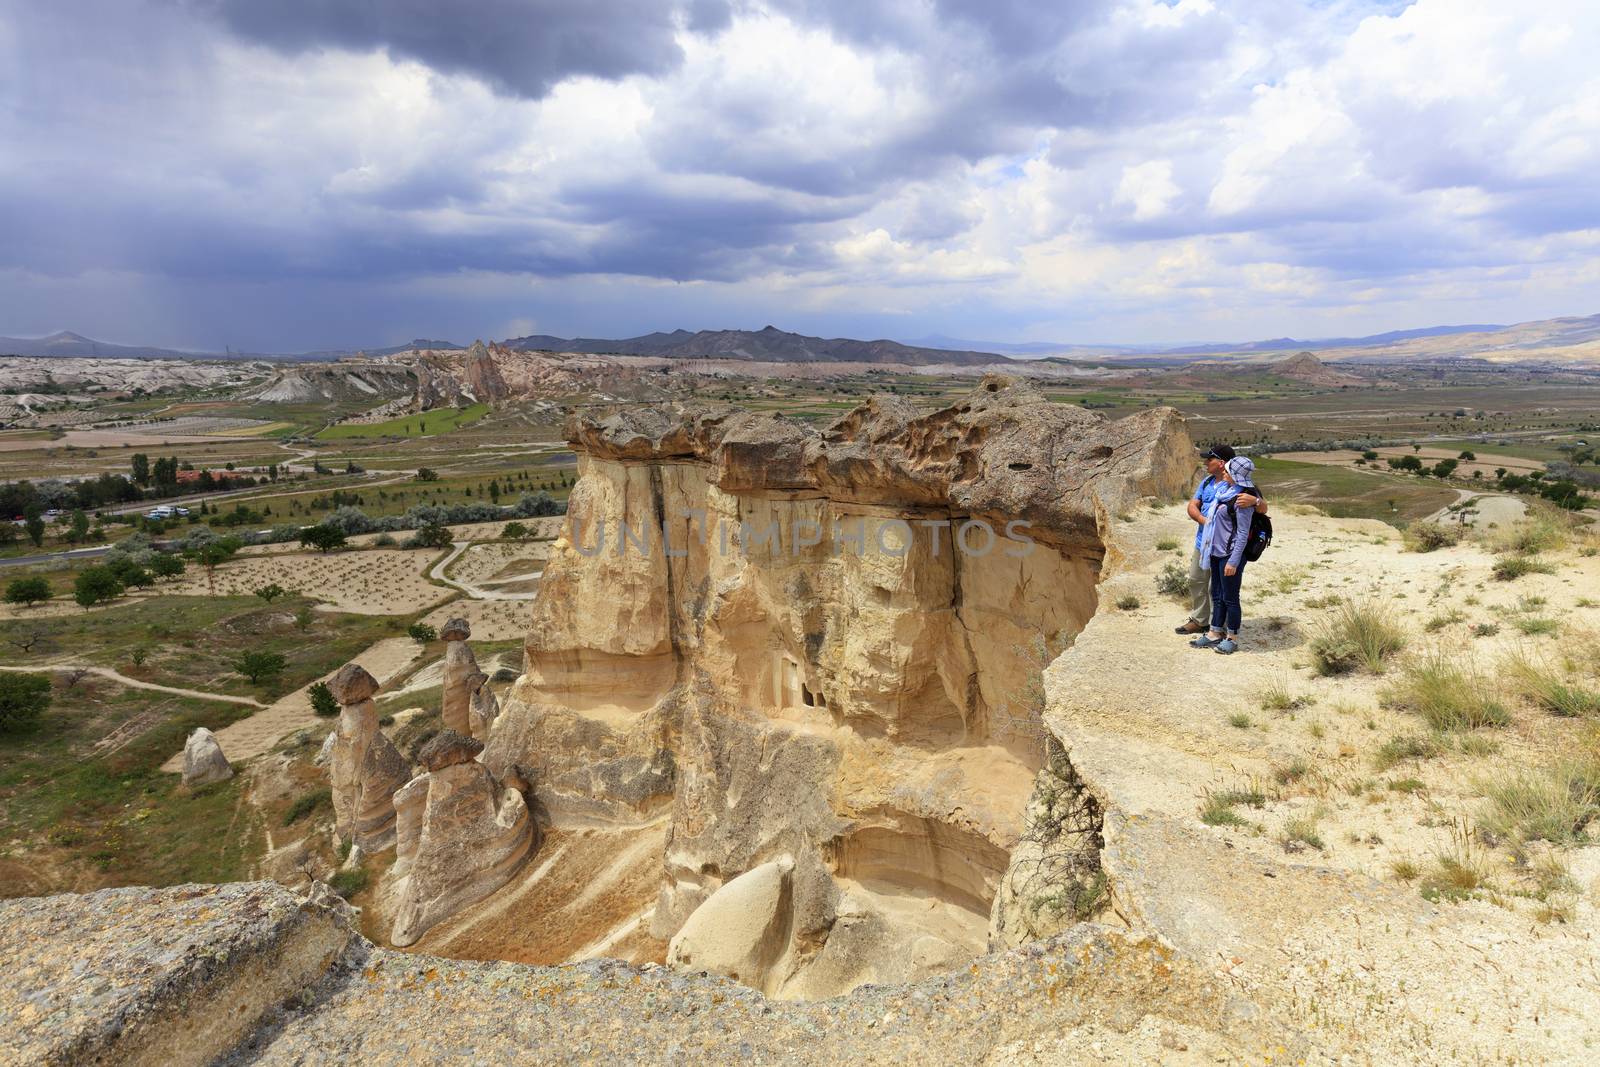 A young couple of tourists with backpacks on their backs stands on the edge of a cliff in Cappadocia and admires the surrounding space against the background of a blue stormy sky and mountain scenery.